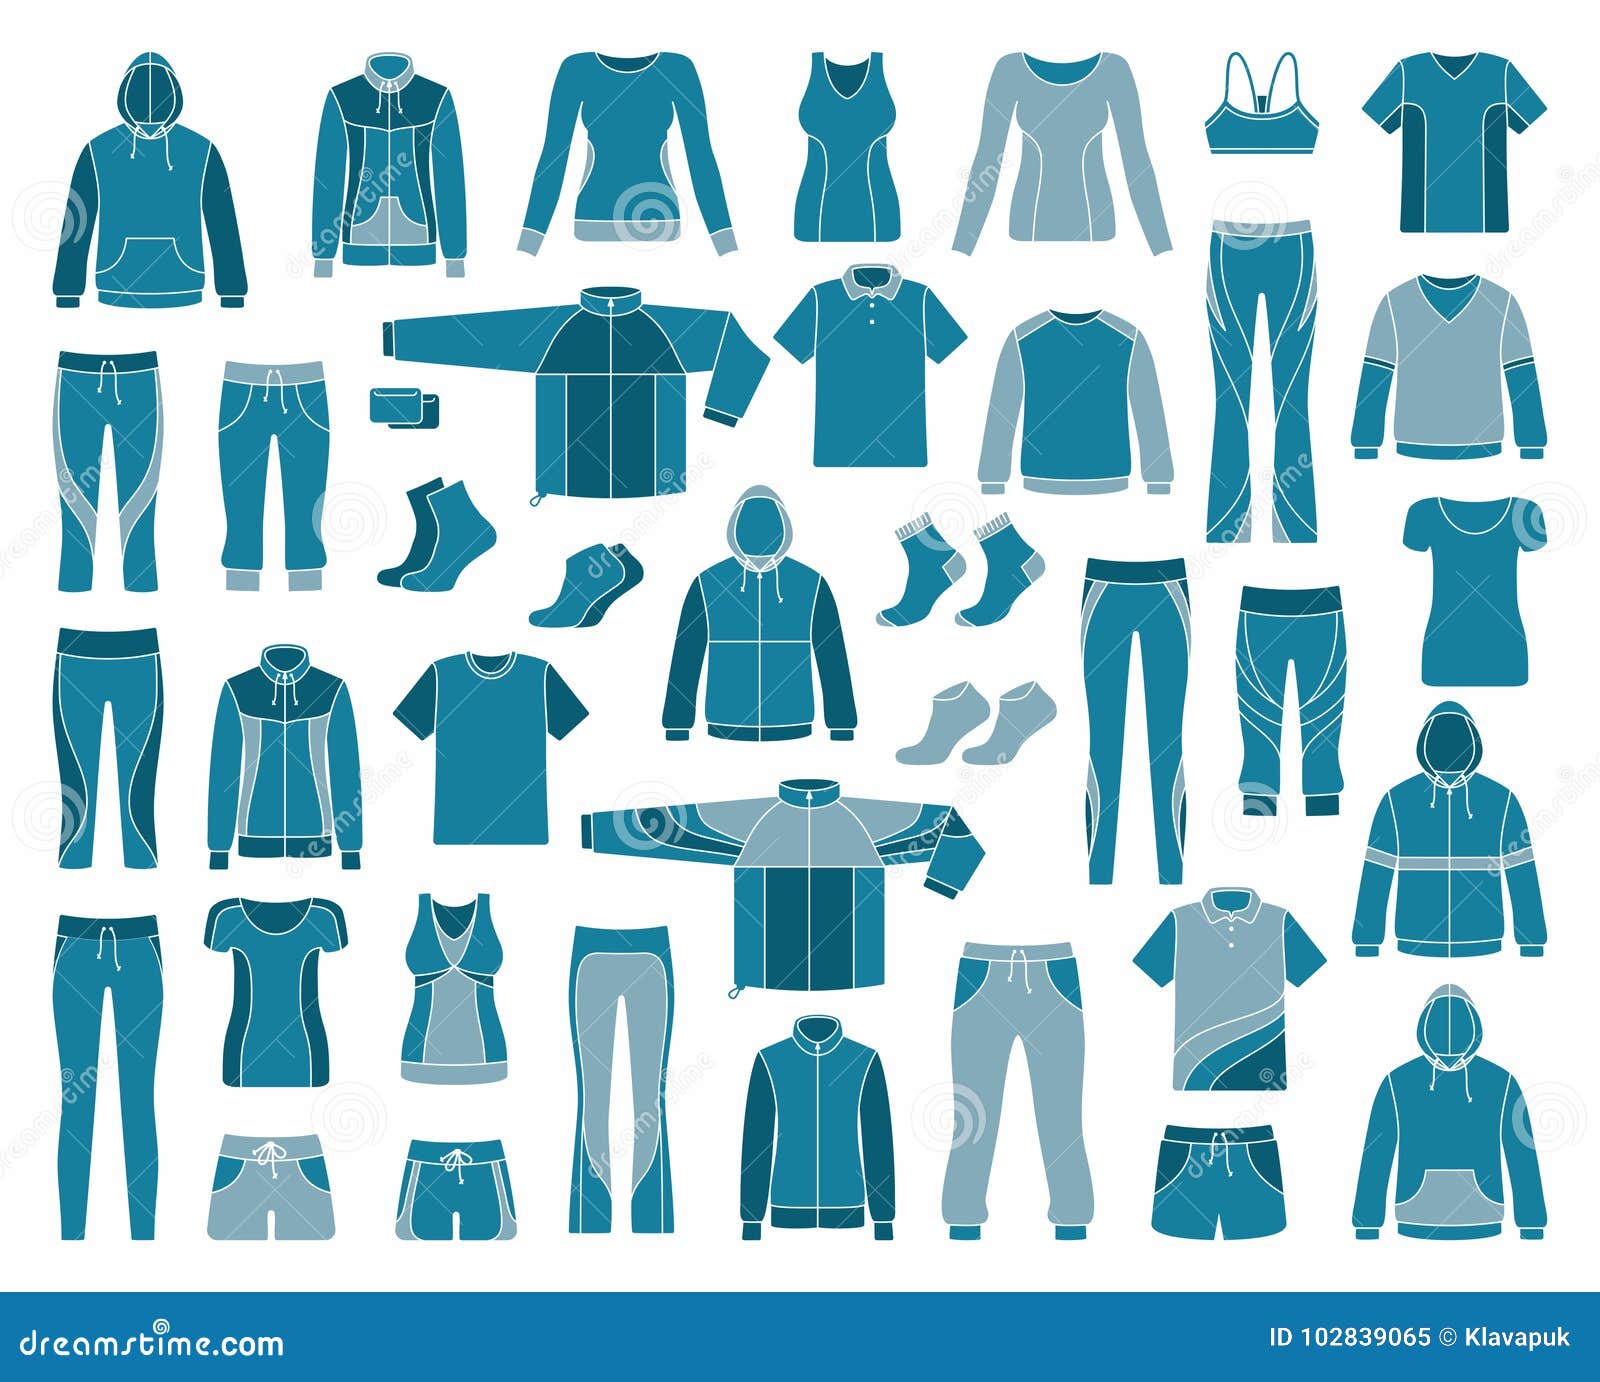 Icons of Clothes for Sports and Workouts Stock Vector - Illustration of ...